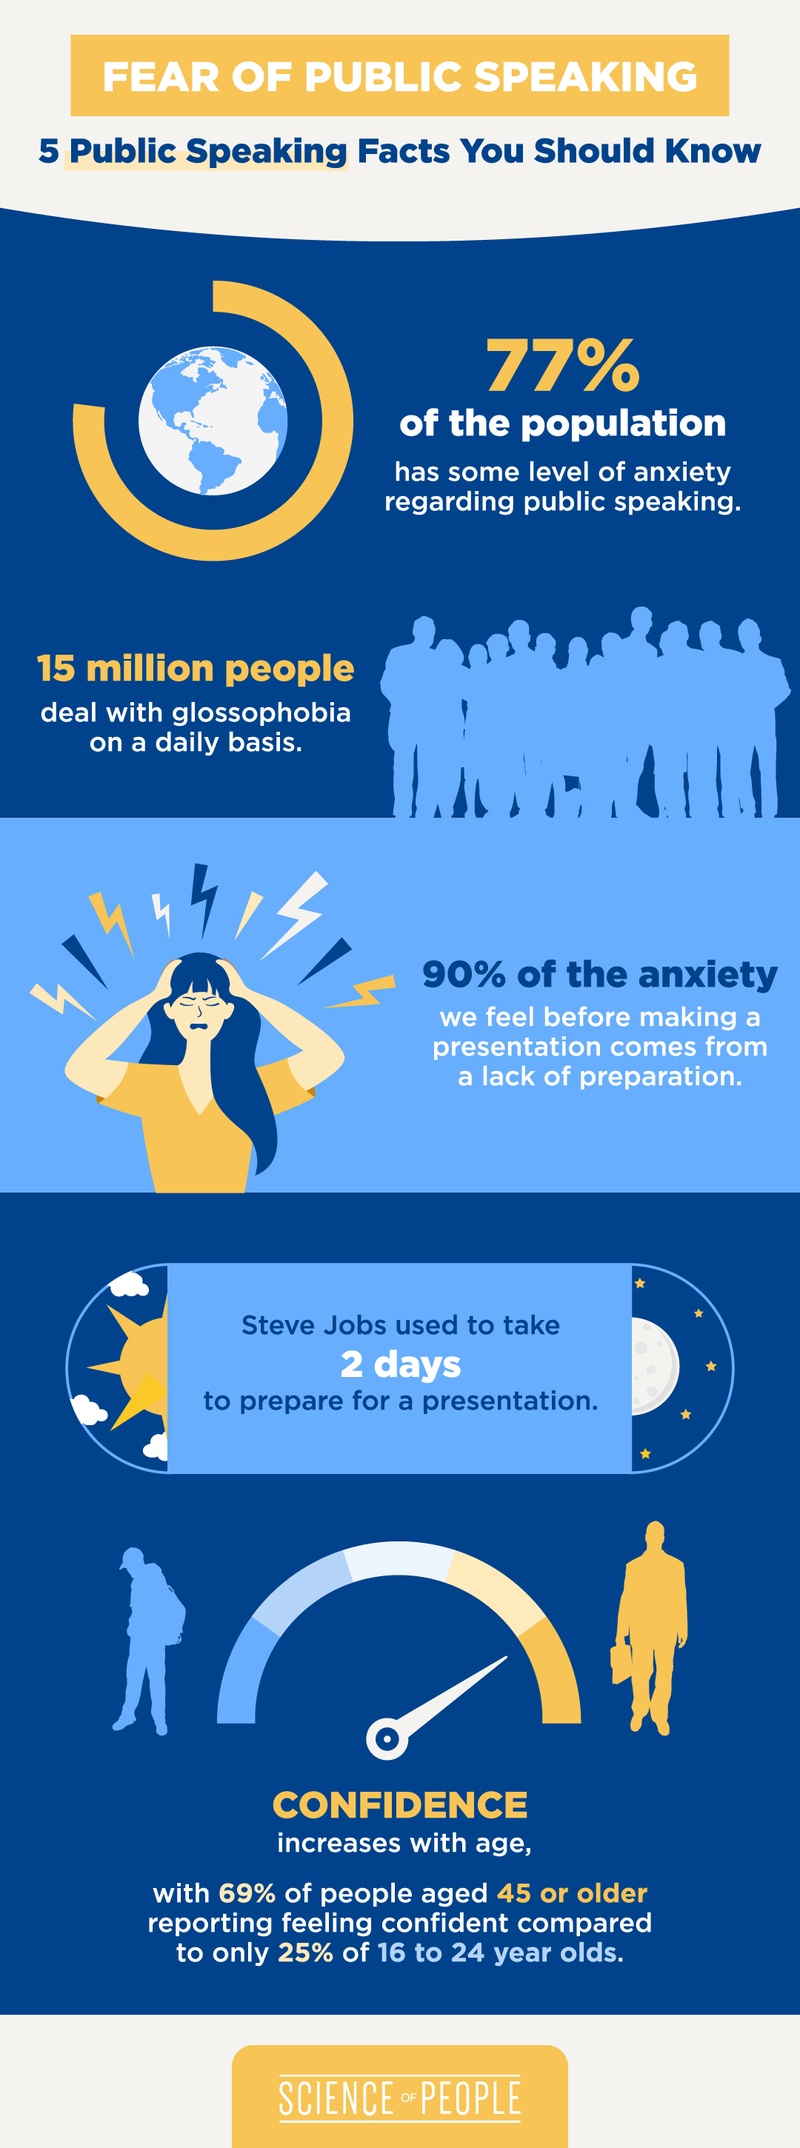 Fear of Public Speaking Infographic - 5 Public Speaking Facts You Should Know